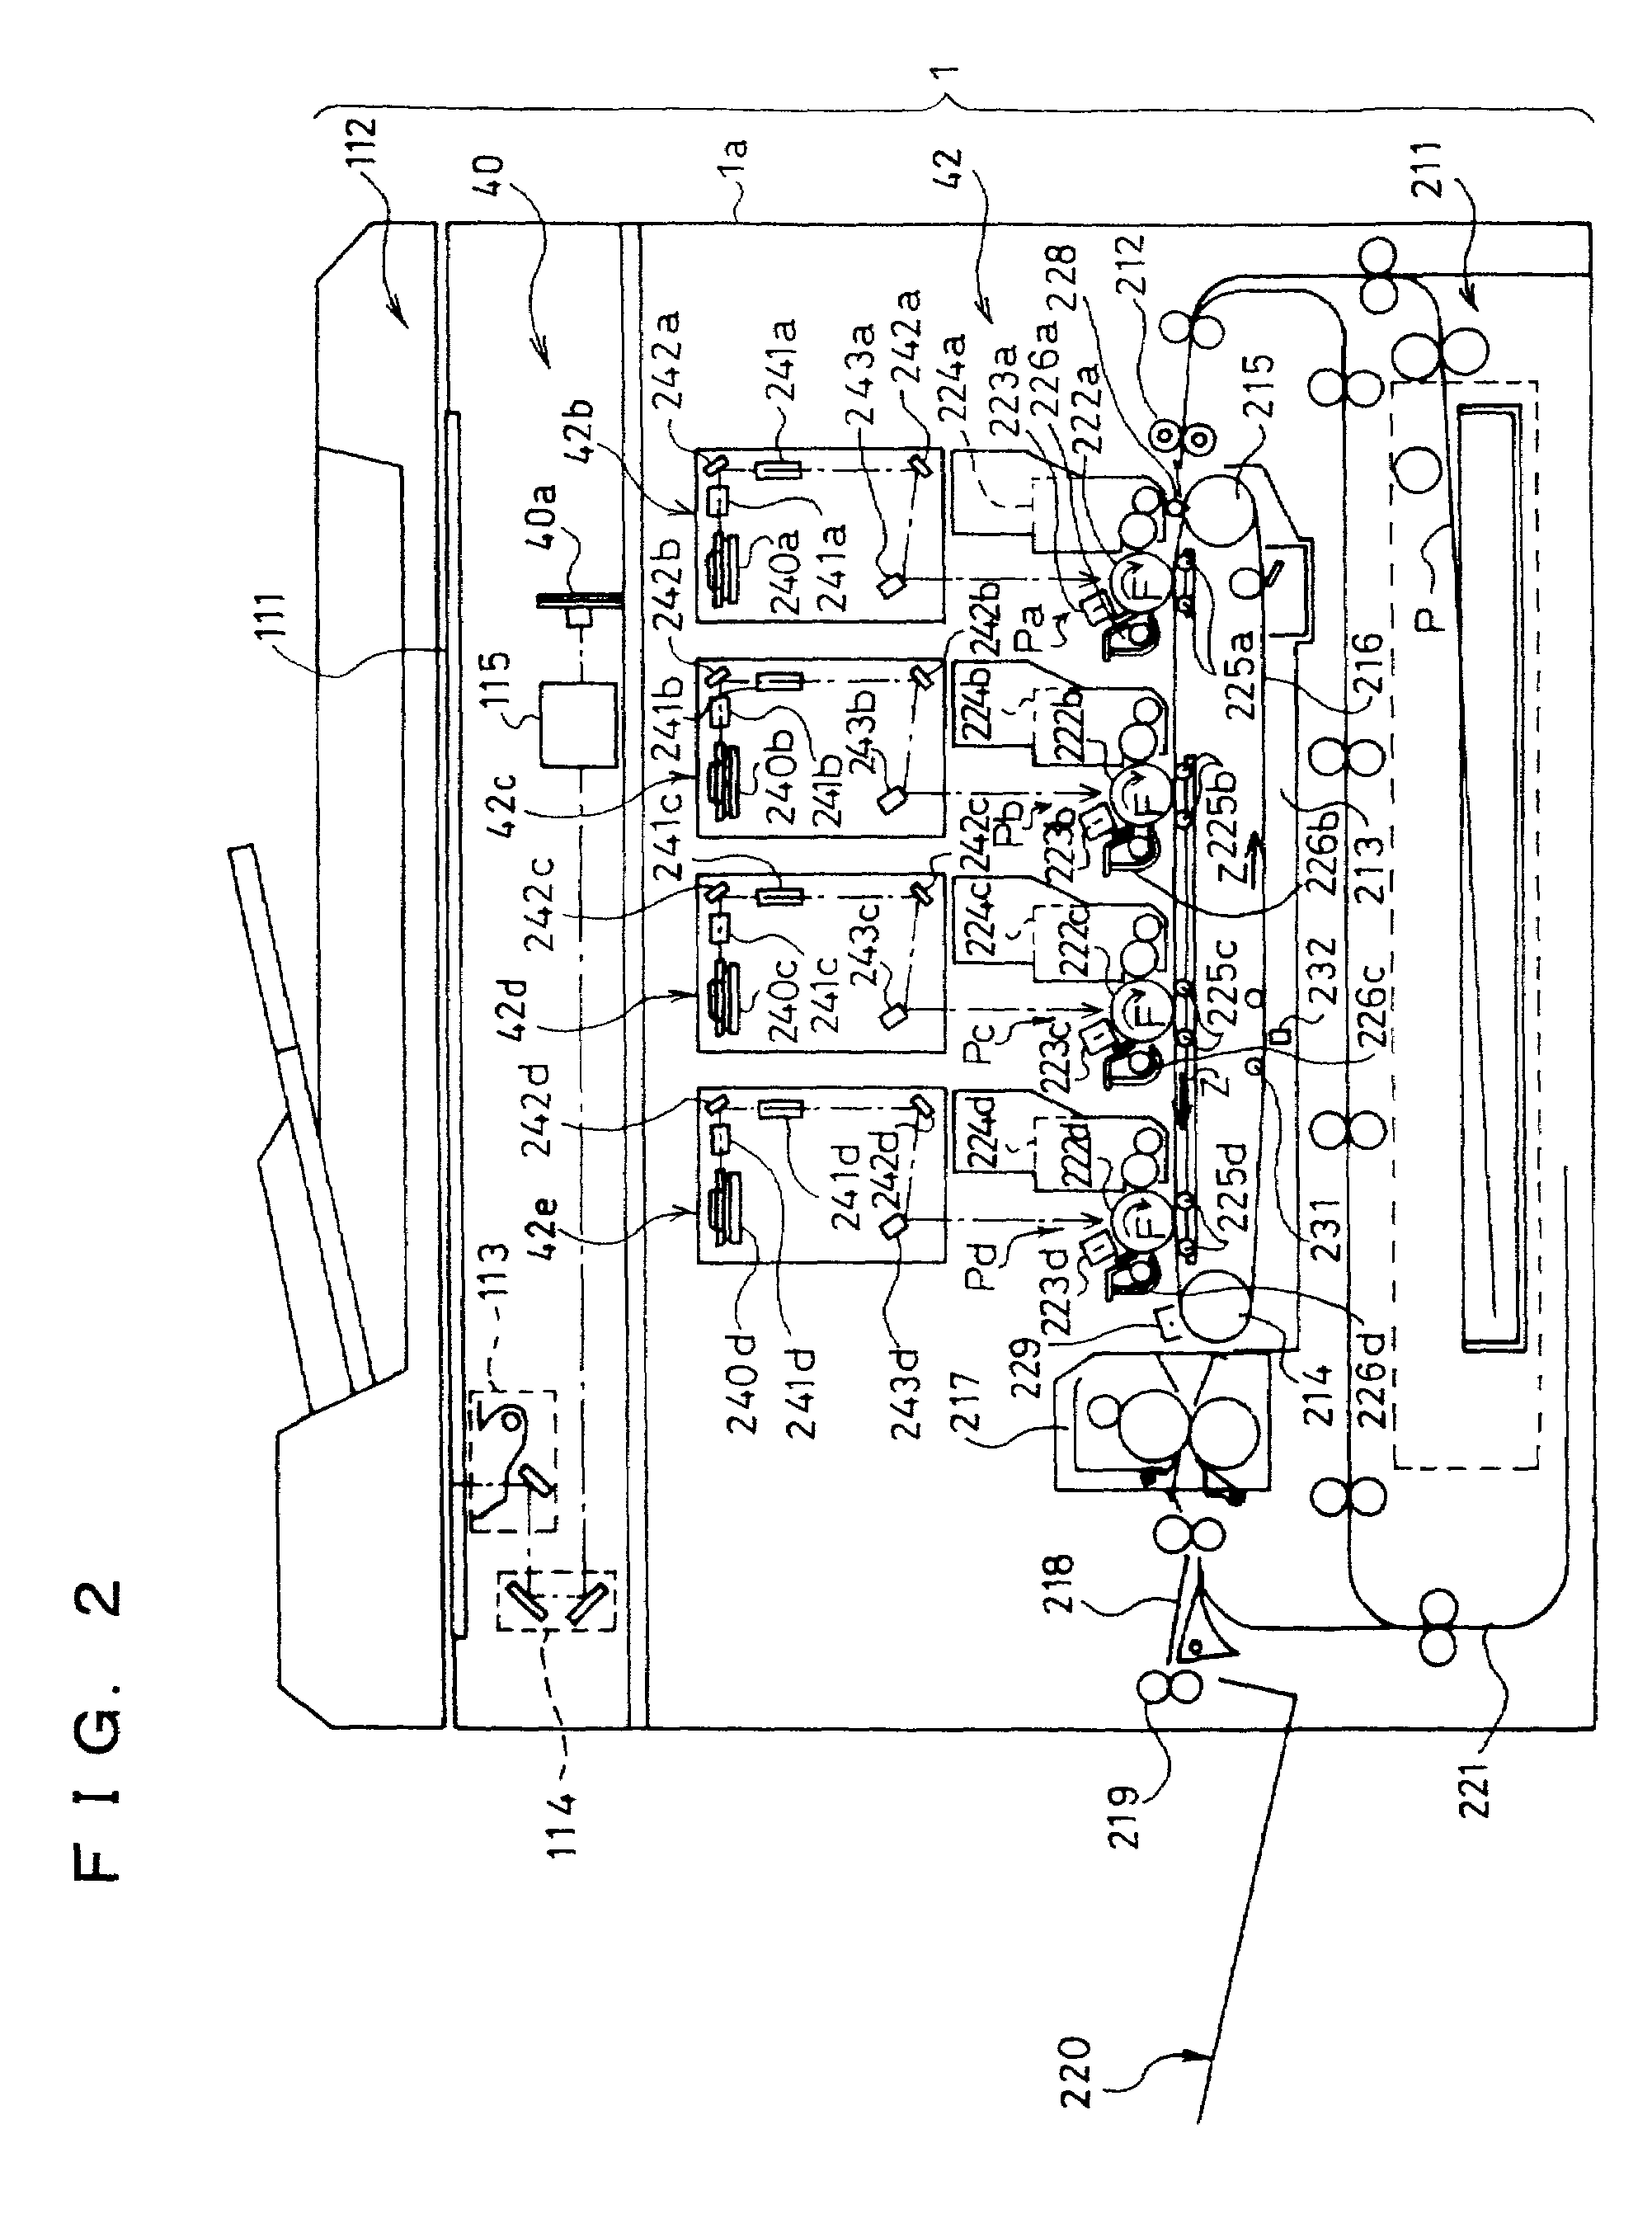 Image processing apparatus and method for the fast and accurate calibration of the same using actual and pseudo reference image data